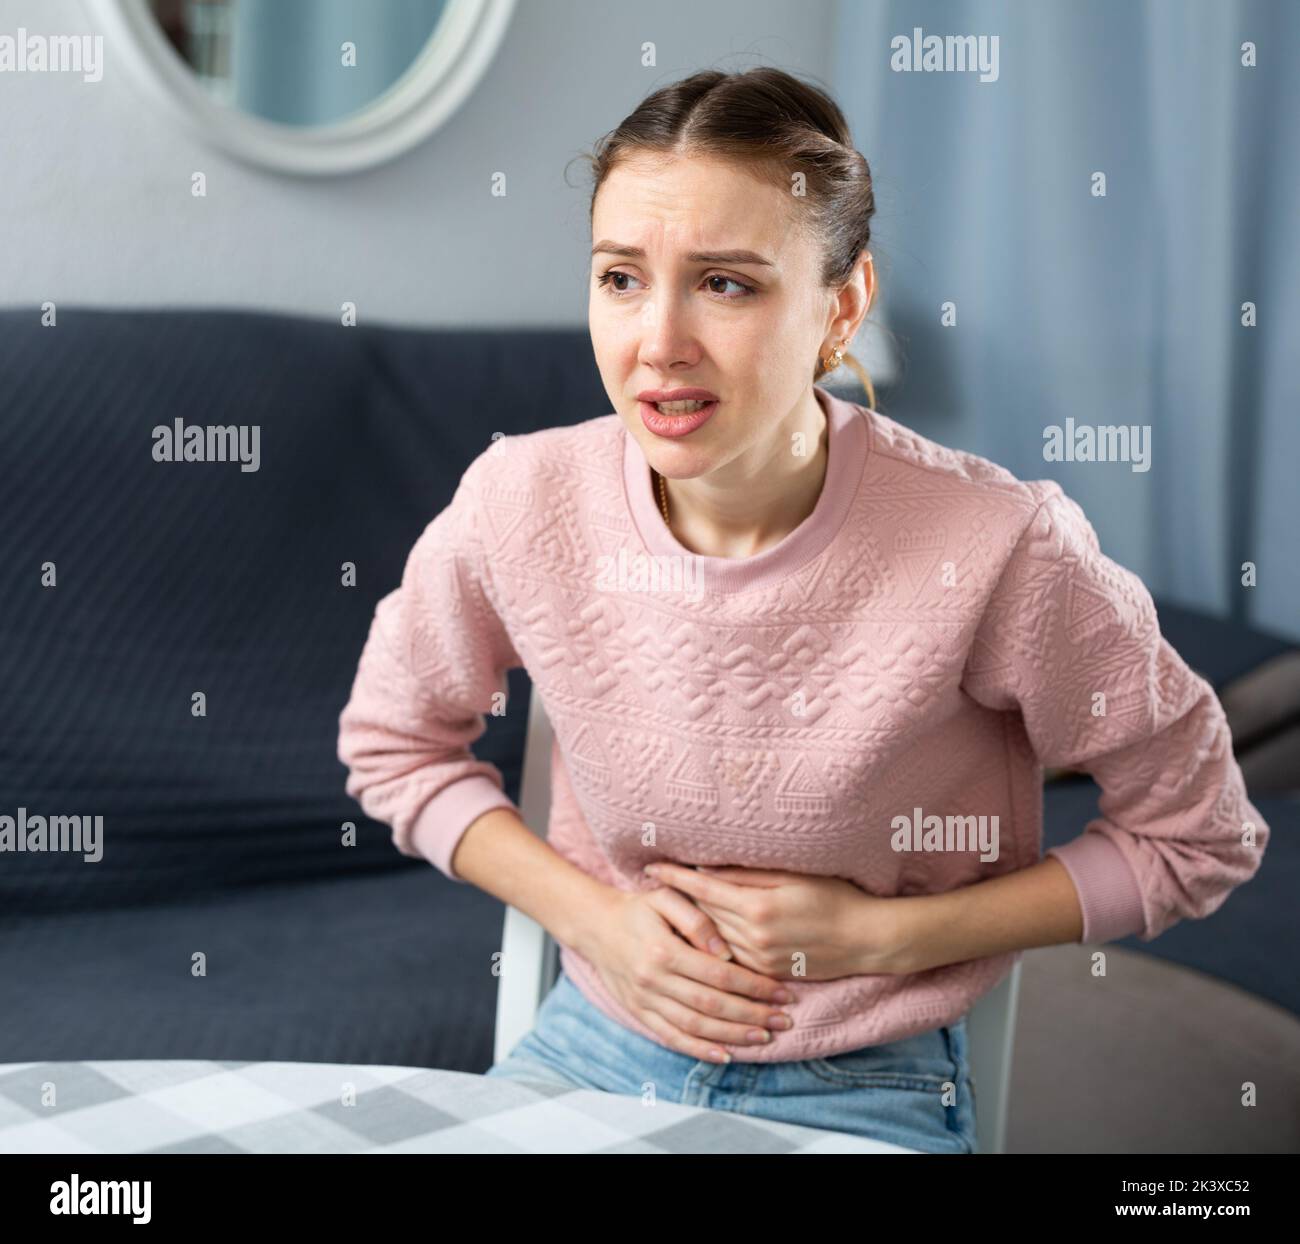 Young woman suffering from abdominal pain Stock Photo